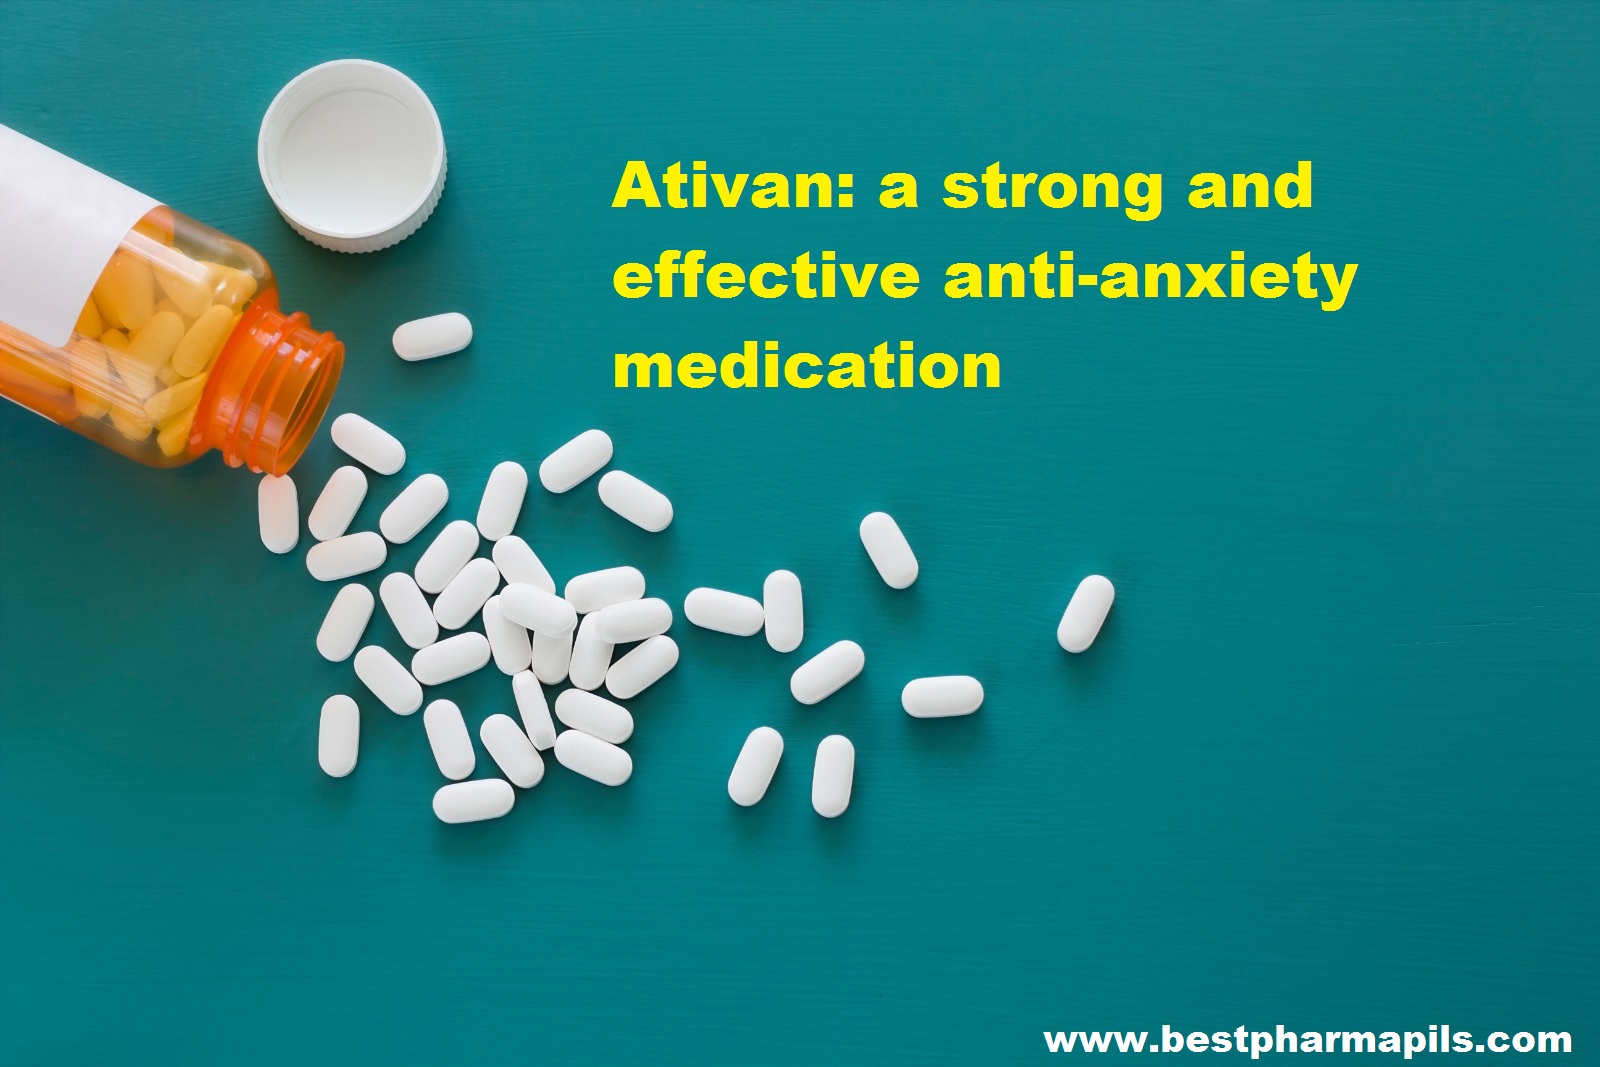 ativan for anxiety